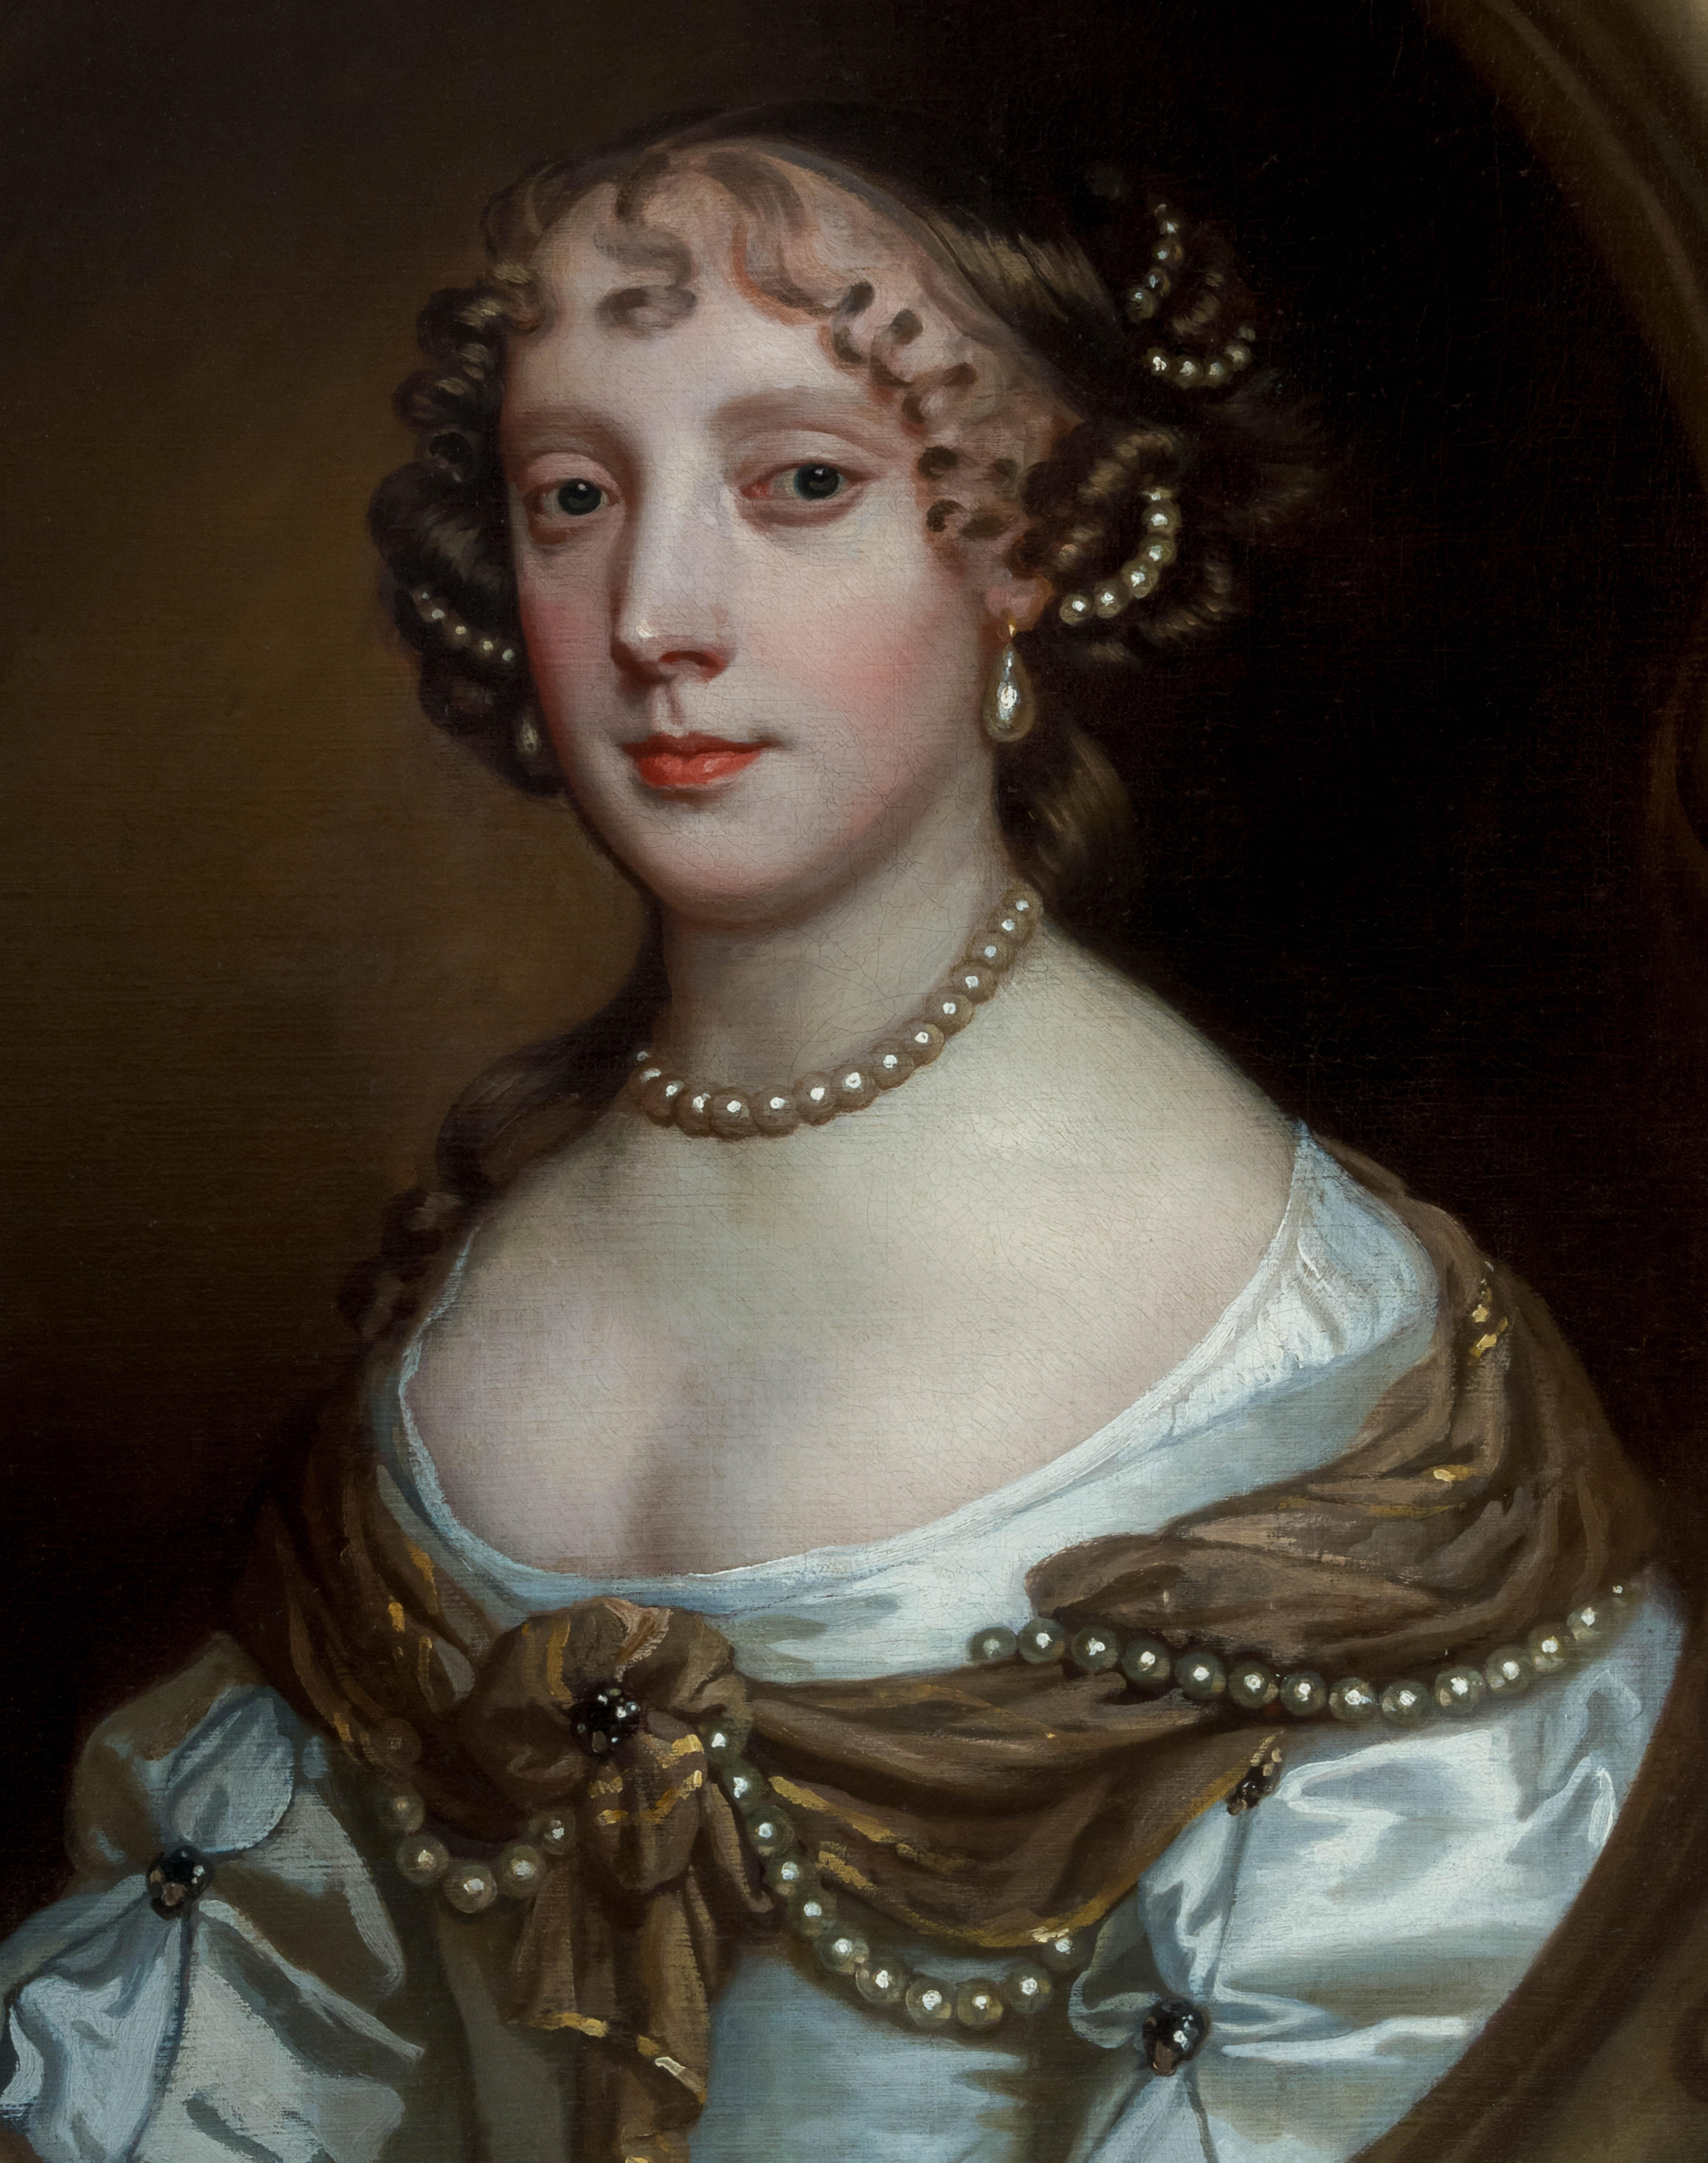 Portrait of Grace Saunderson, Viscountess Castleton (1635-1667) c.1665-67
Sir Peter Lely and Studio (1618-1680)

Titan Fine Art present this work, which formed part of a collection of family pictures and heirlooms of the Saunderson, Viscount